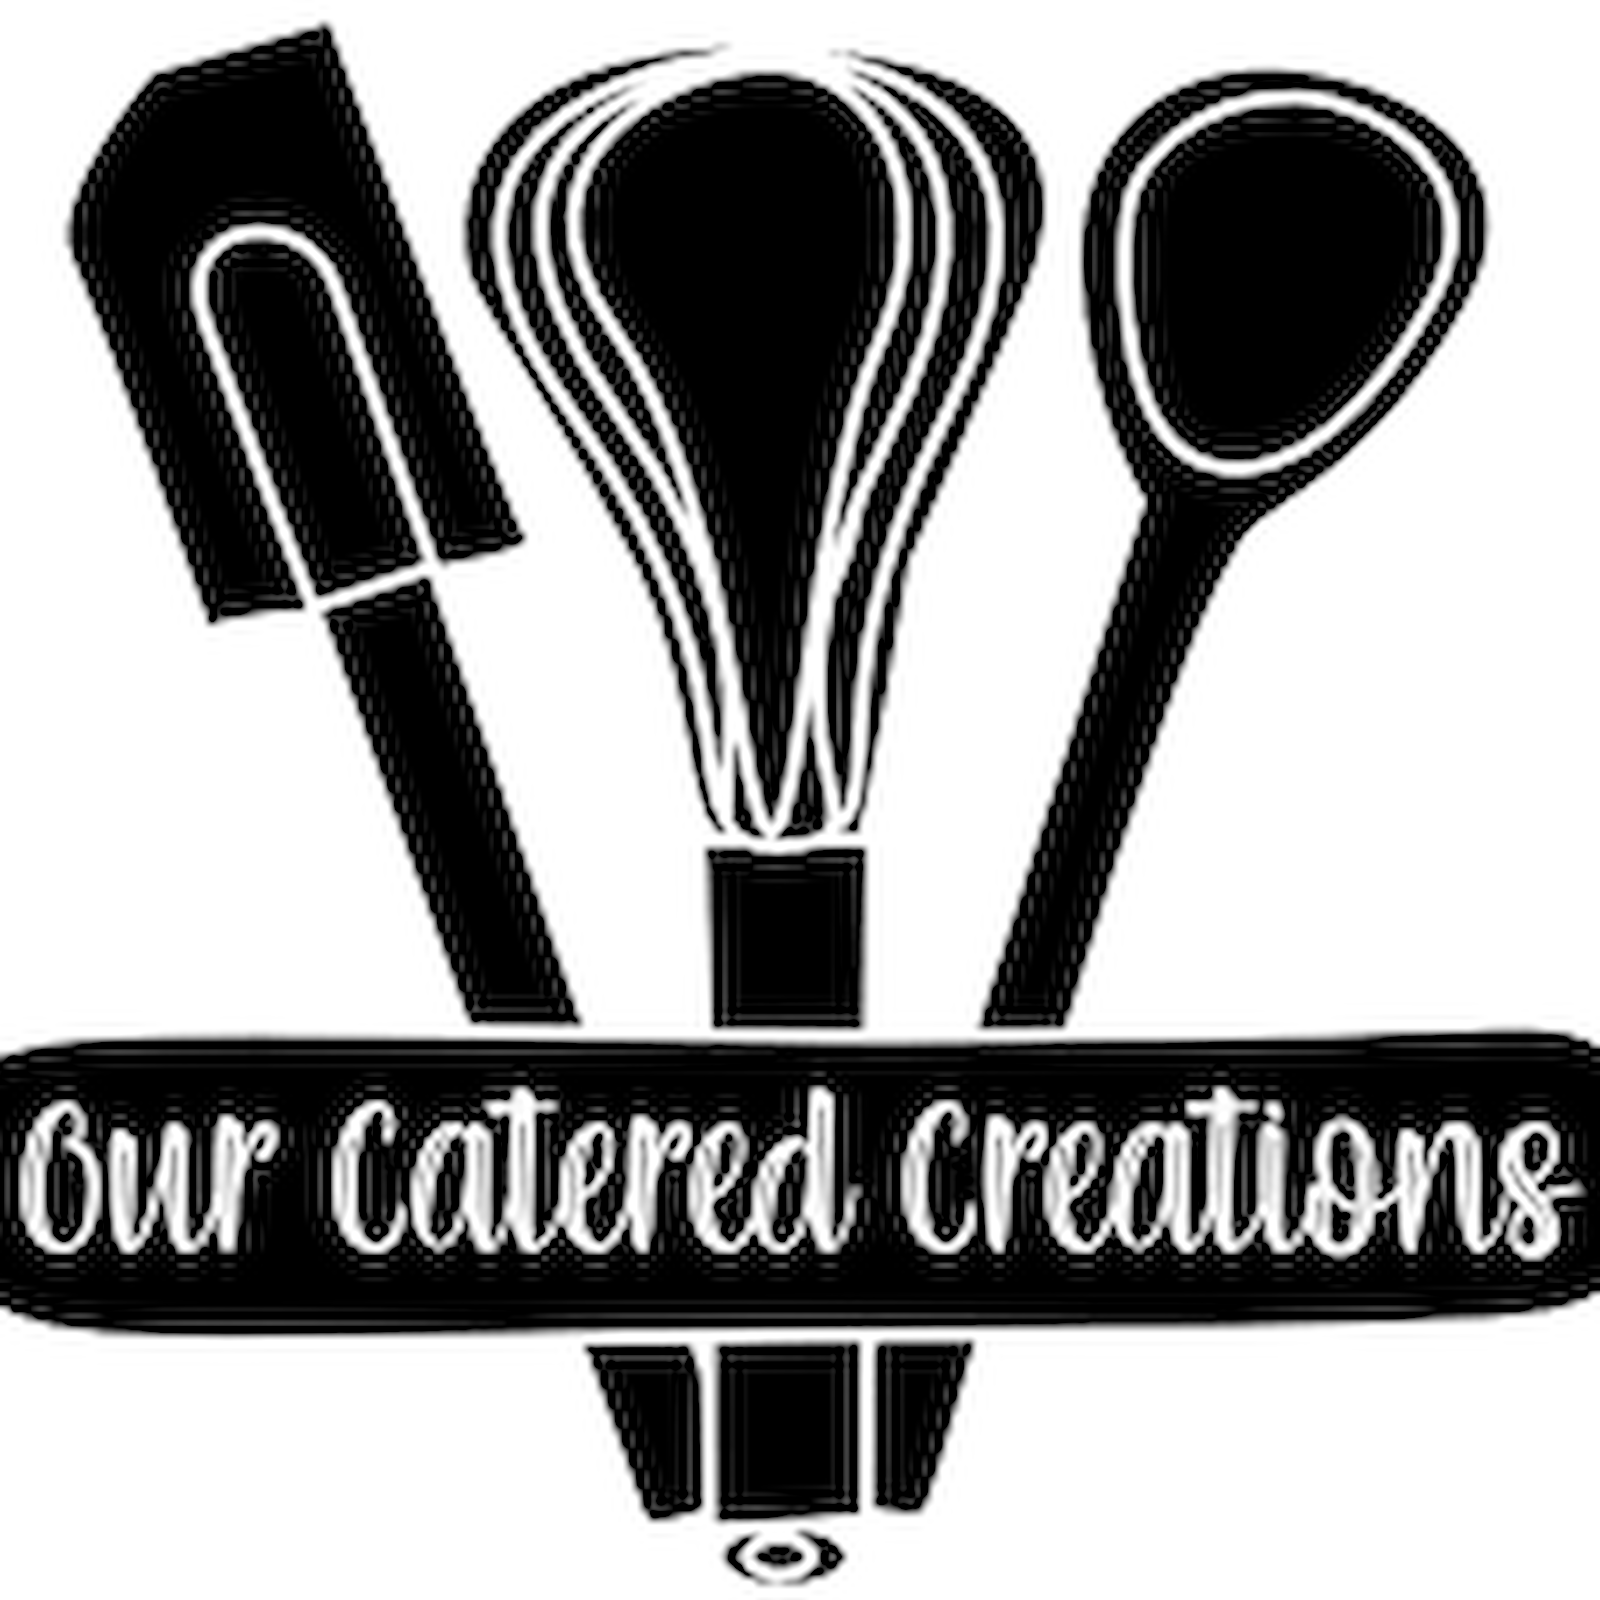 Our Catered Creations